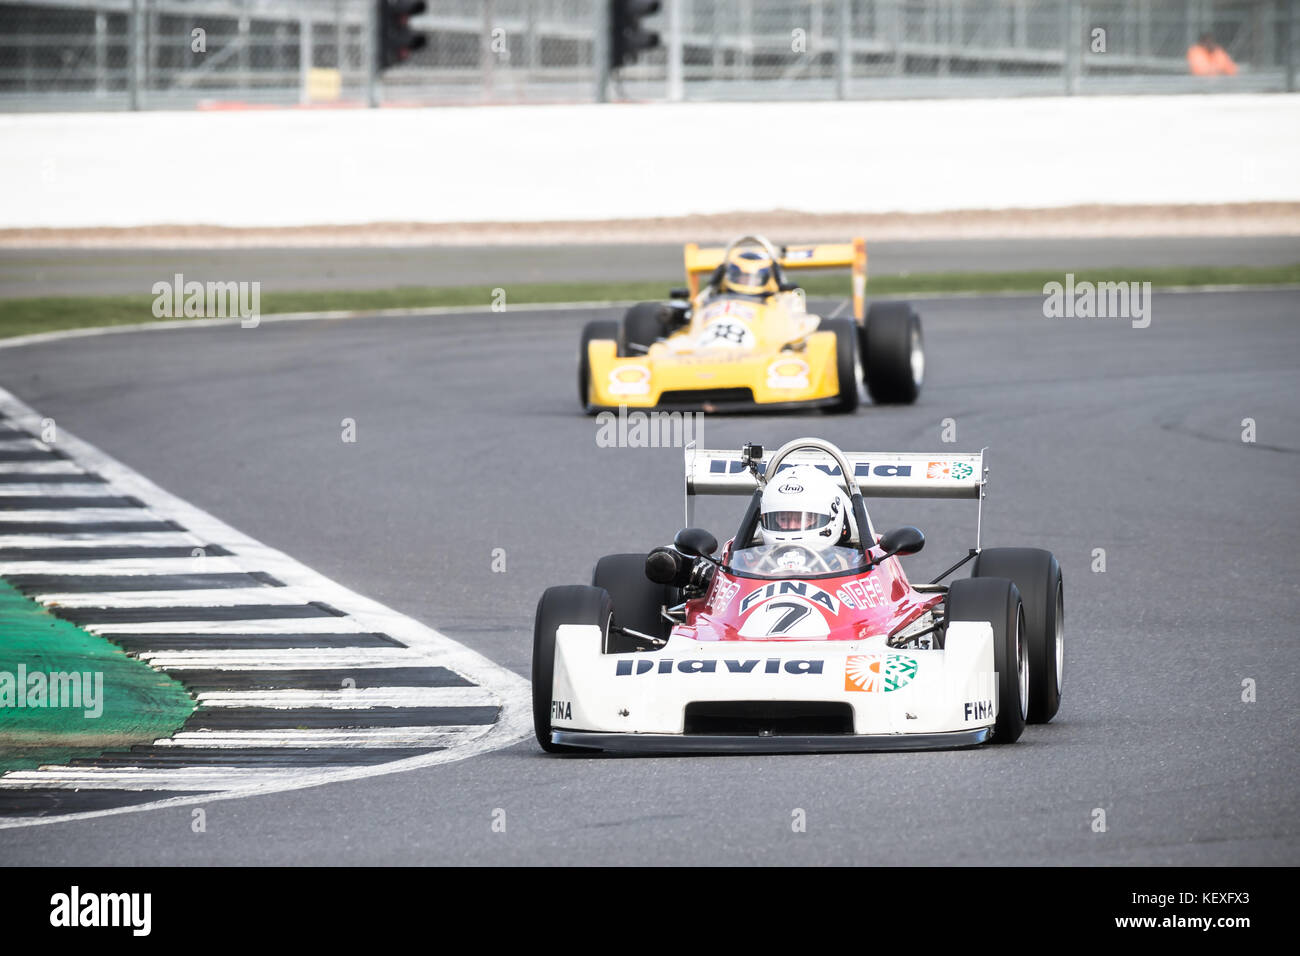 Richard Trott during the HSCC Classic Formula 3 race 1, from Silverstone. Despite finding himself down the order on the opening lap, Trott would finis Stock Photo